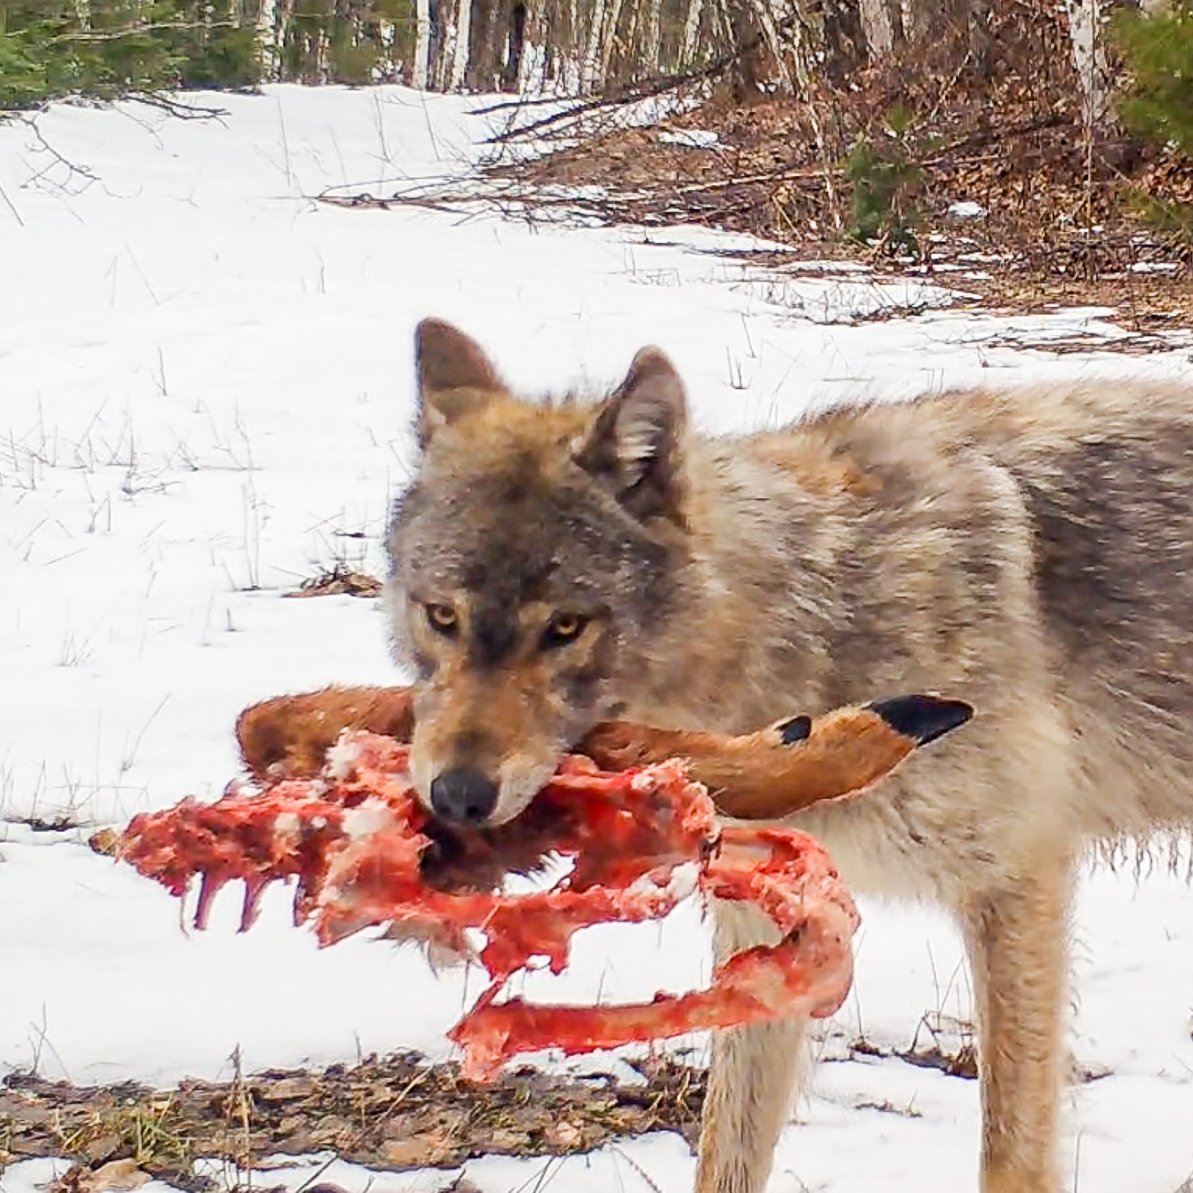 Many have recently claimed that wolves are decimating the deer population and destroying deer hunting and we need to kill wolves ASAP to turn things around. Below is a deep dive into the data on wolves, deer, and deer hunting in our area and northeastern Minnesota